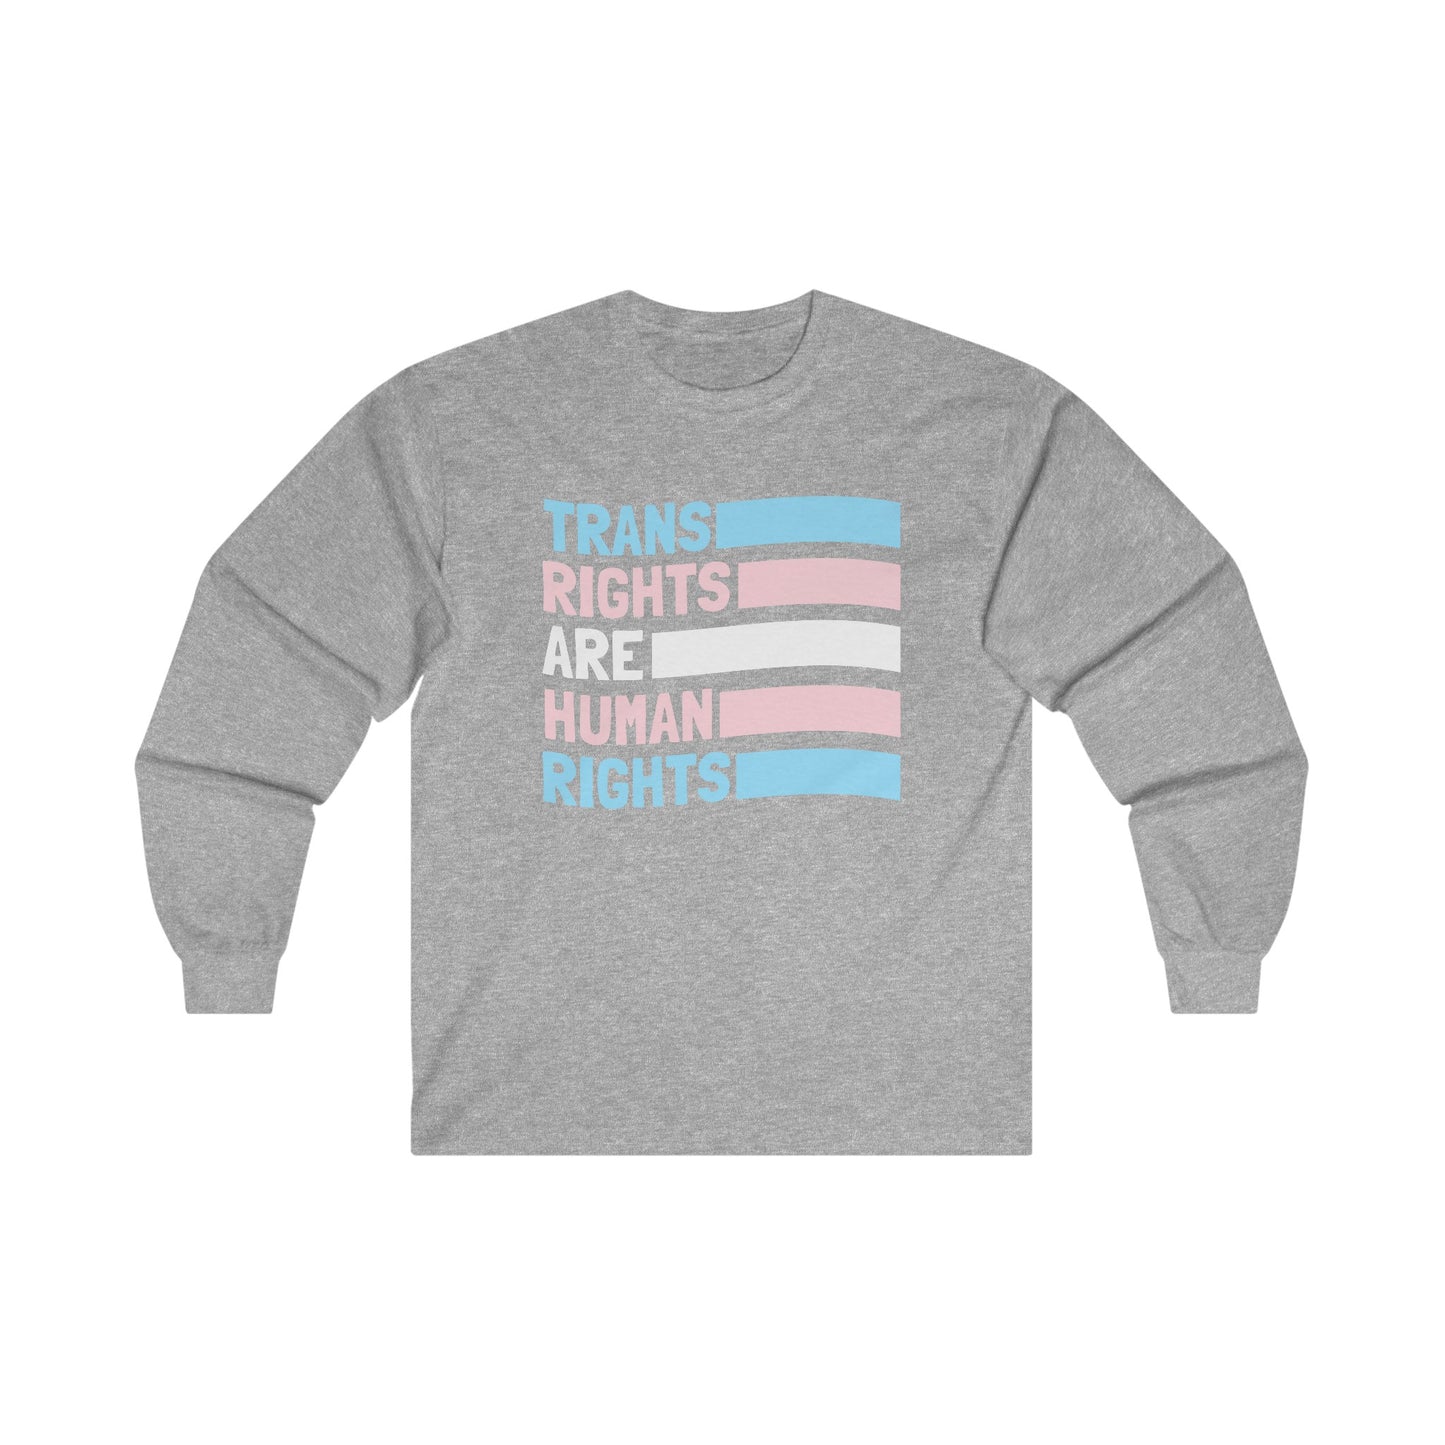 “Trans Rights Are Human Rights” Unisex Long Sleeve T-Shirt